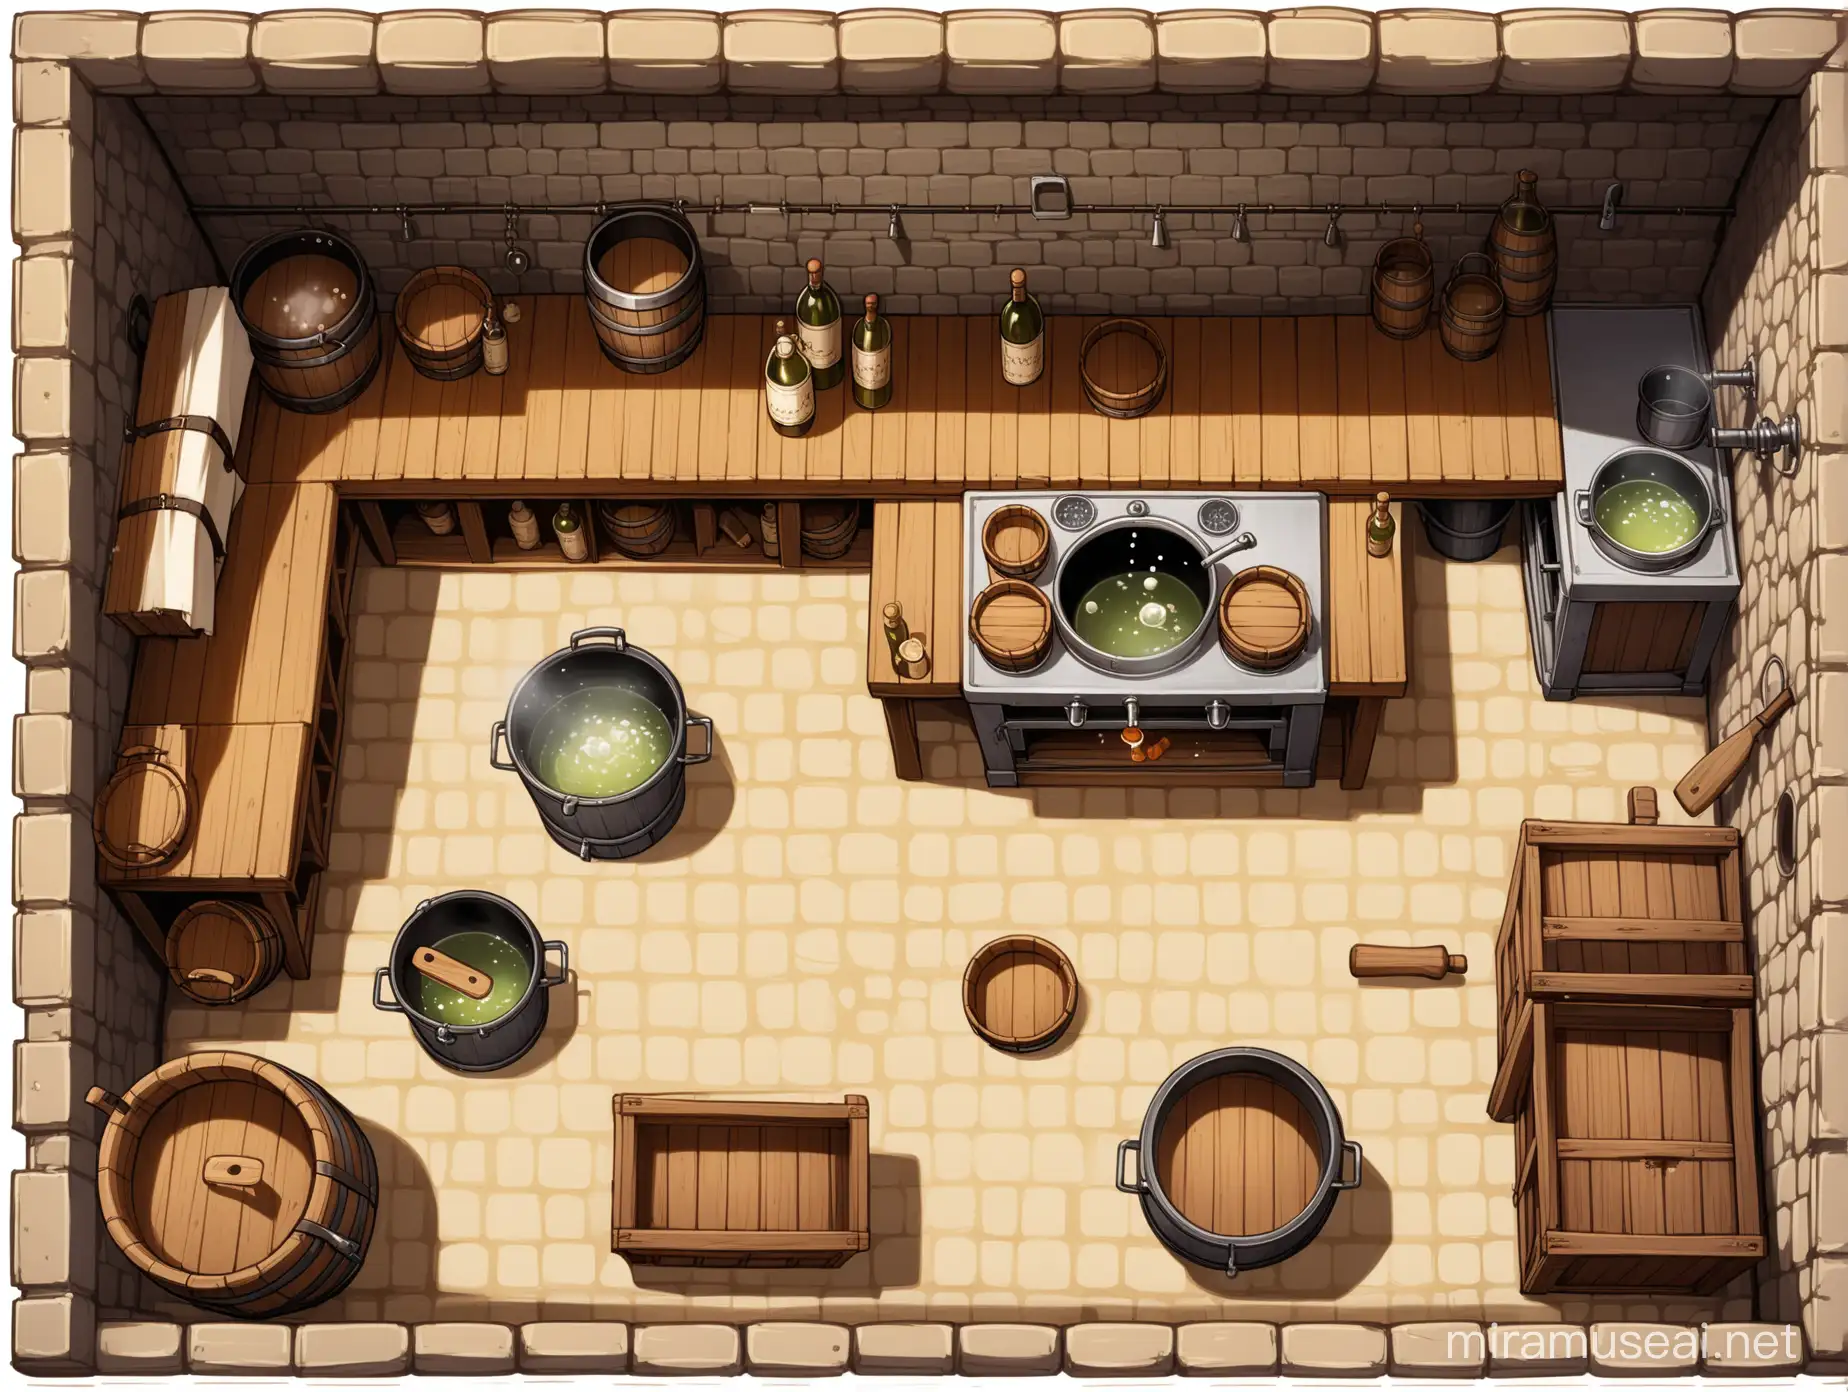 An overhead game map of a medieval kitchen, that includes an oven, a bubbling cauldron, a wooden chopping block with cleaver stuck in its surface, a pantry with shelves full of bottles and bags, a water well with pump and bucket, a large table with rolling pin, and several barrels